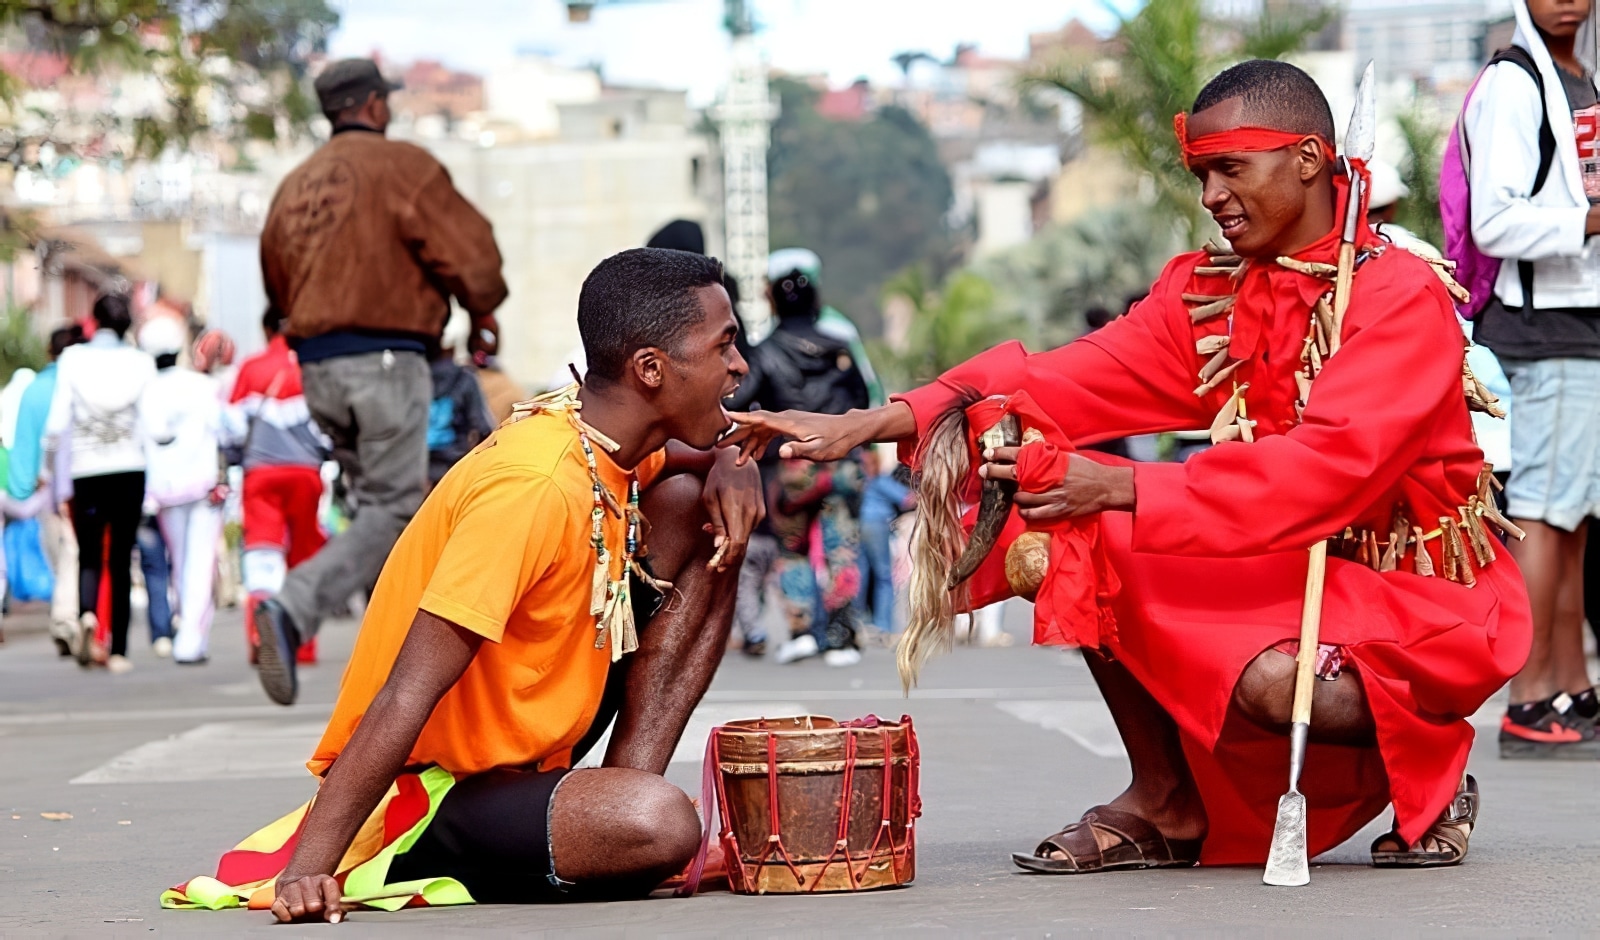 In Madagascar, the custom is to go see traditional healers